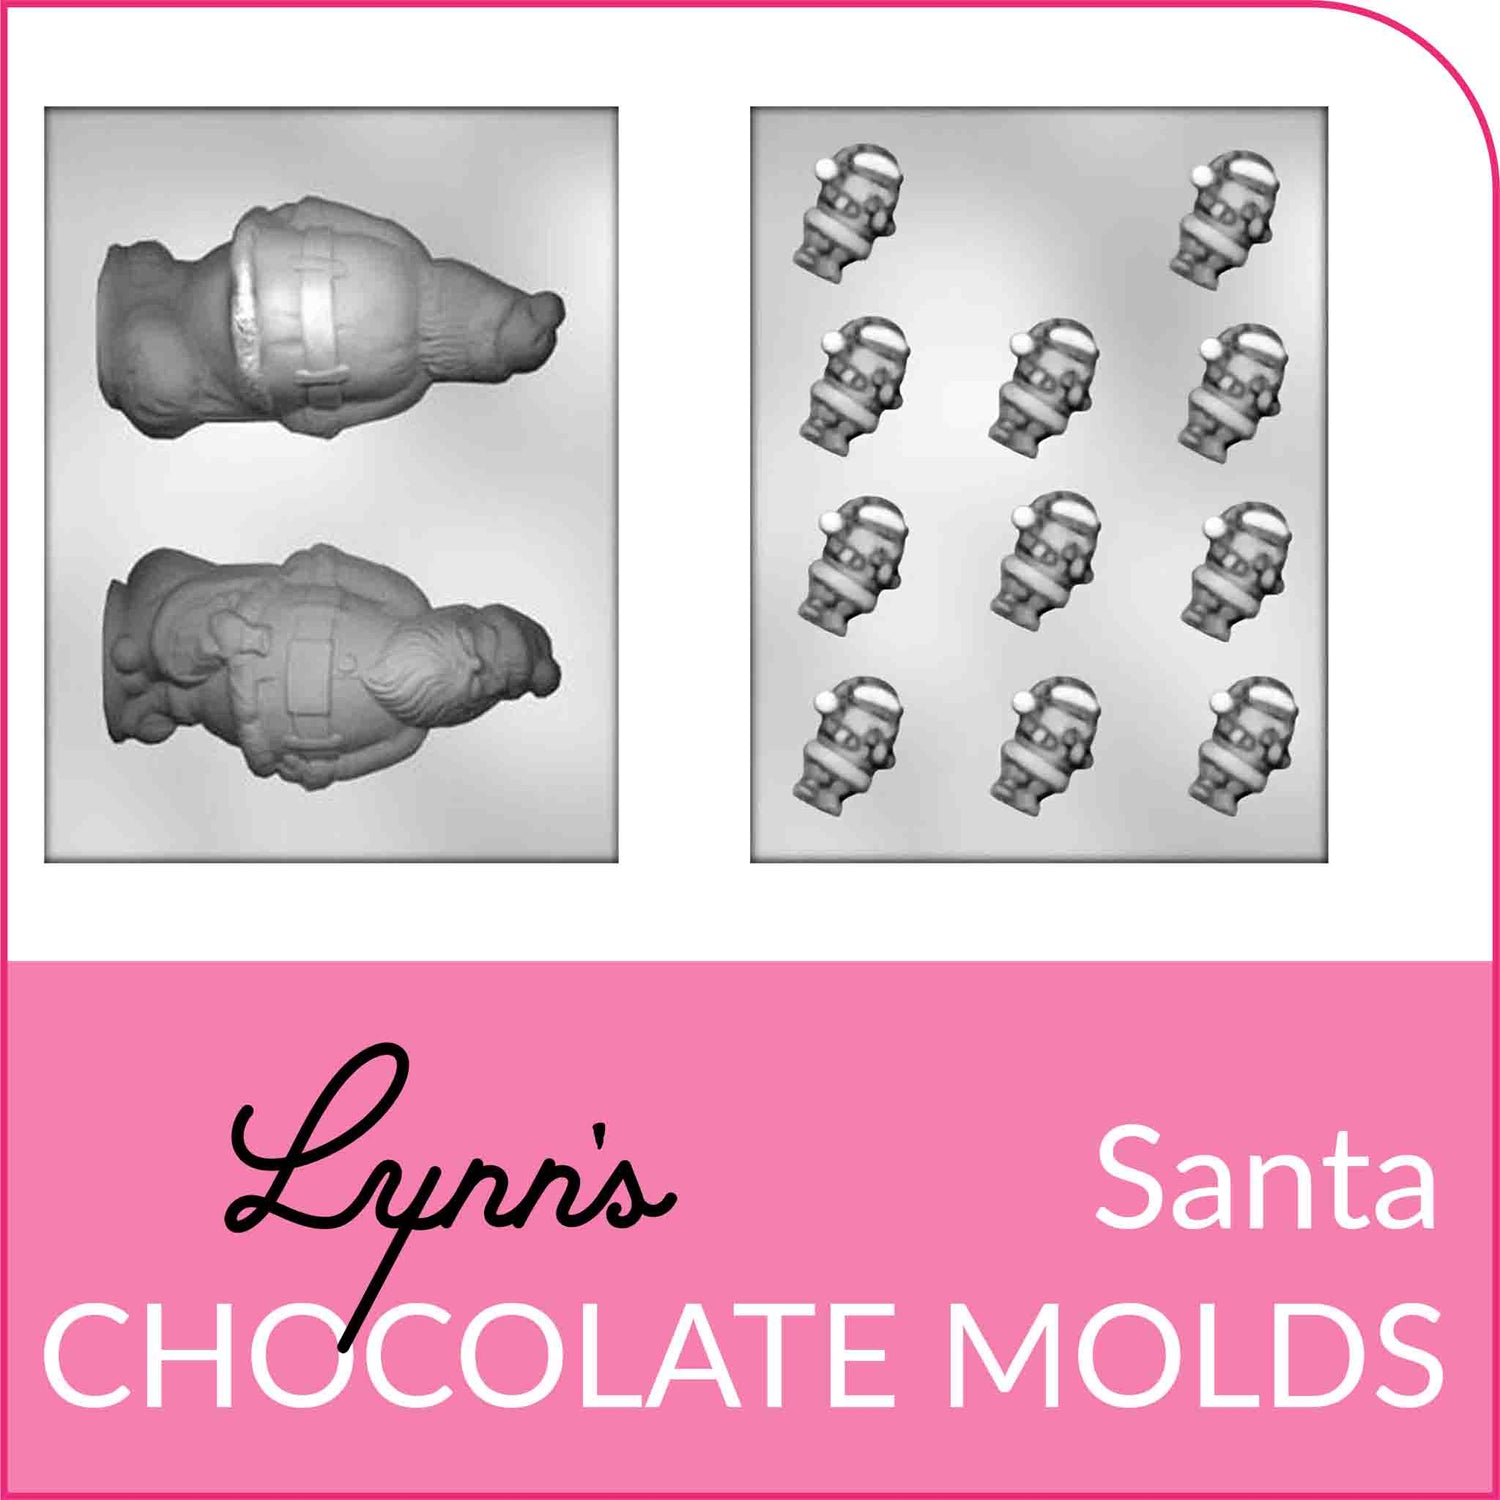 Shop Lynn's collection of Santa-Themed Chocolate Molds